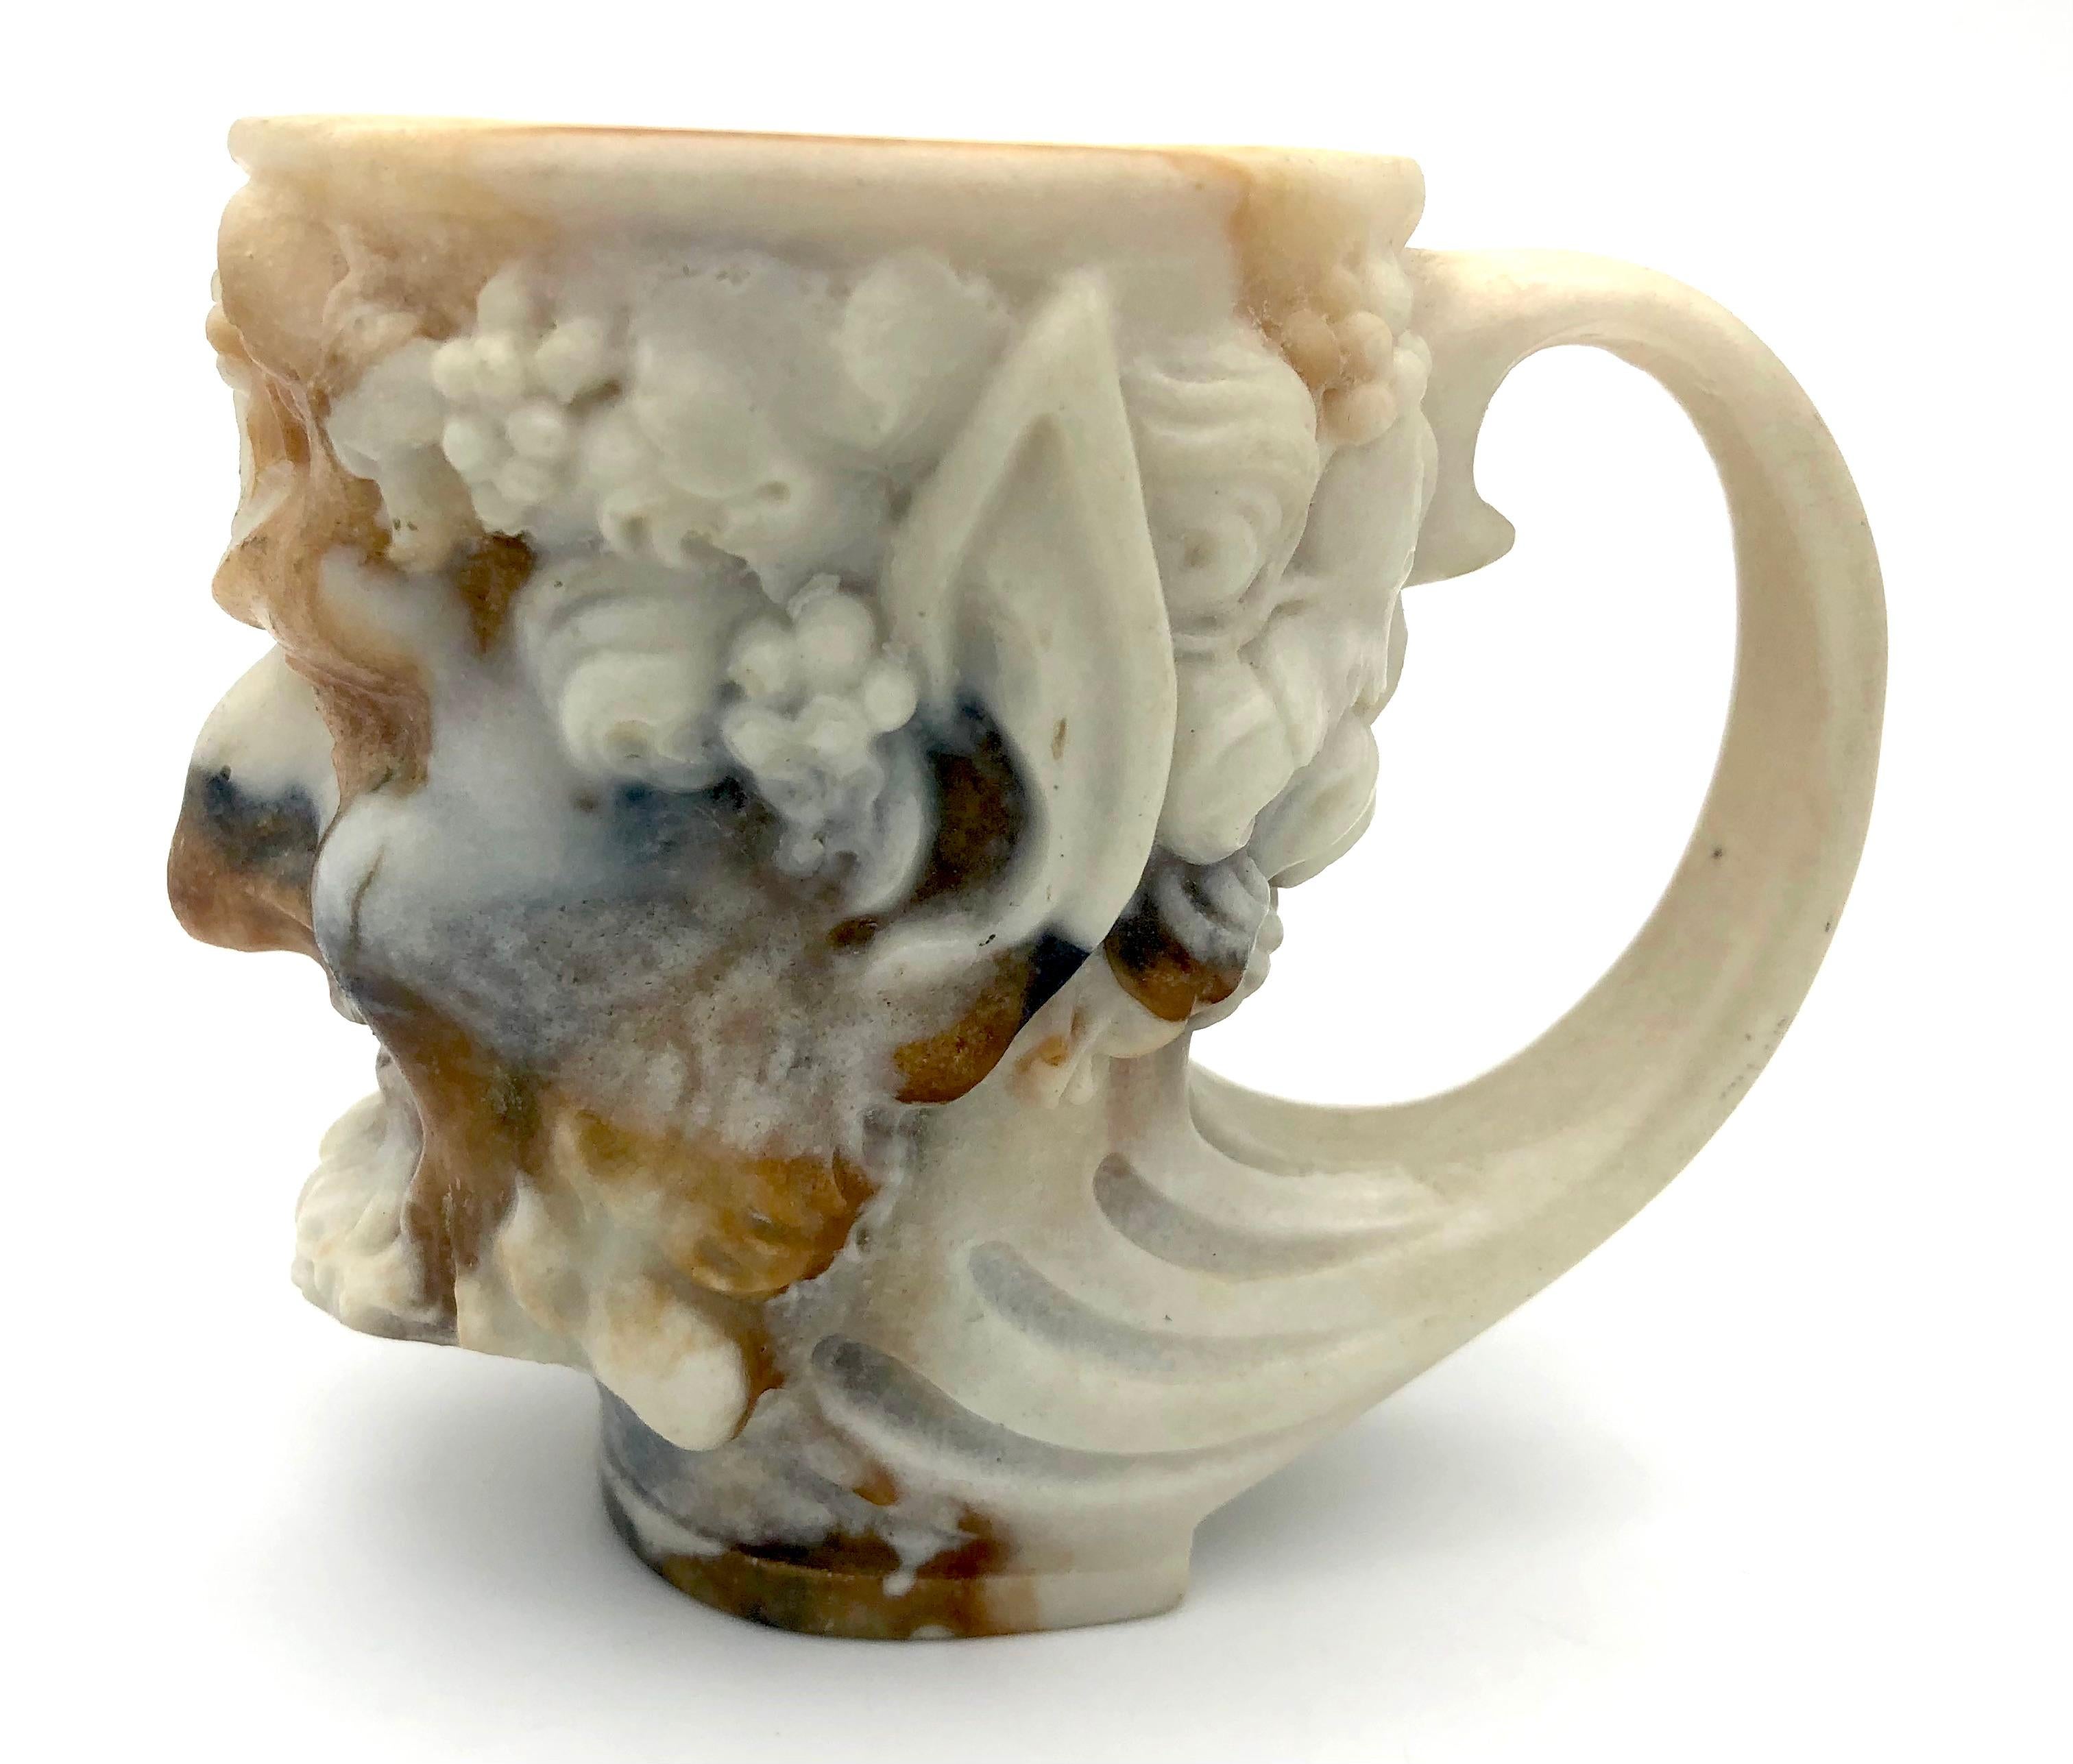 This wonderful beaker in the shape of a faun has been molded out of thick marbled glass.